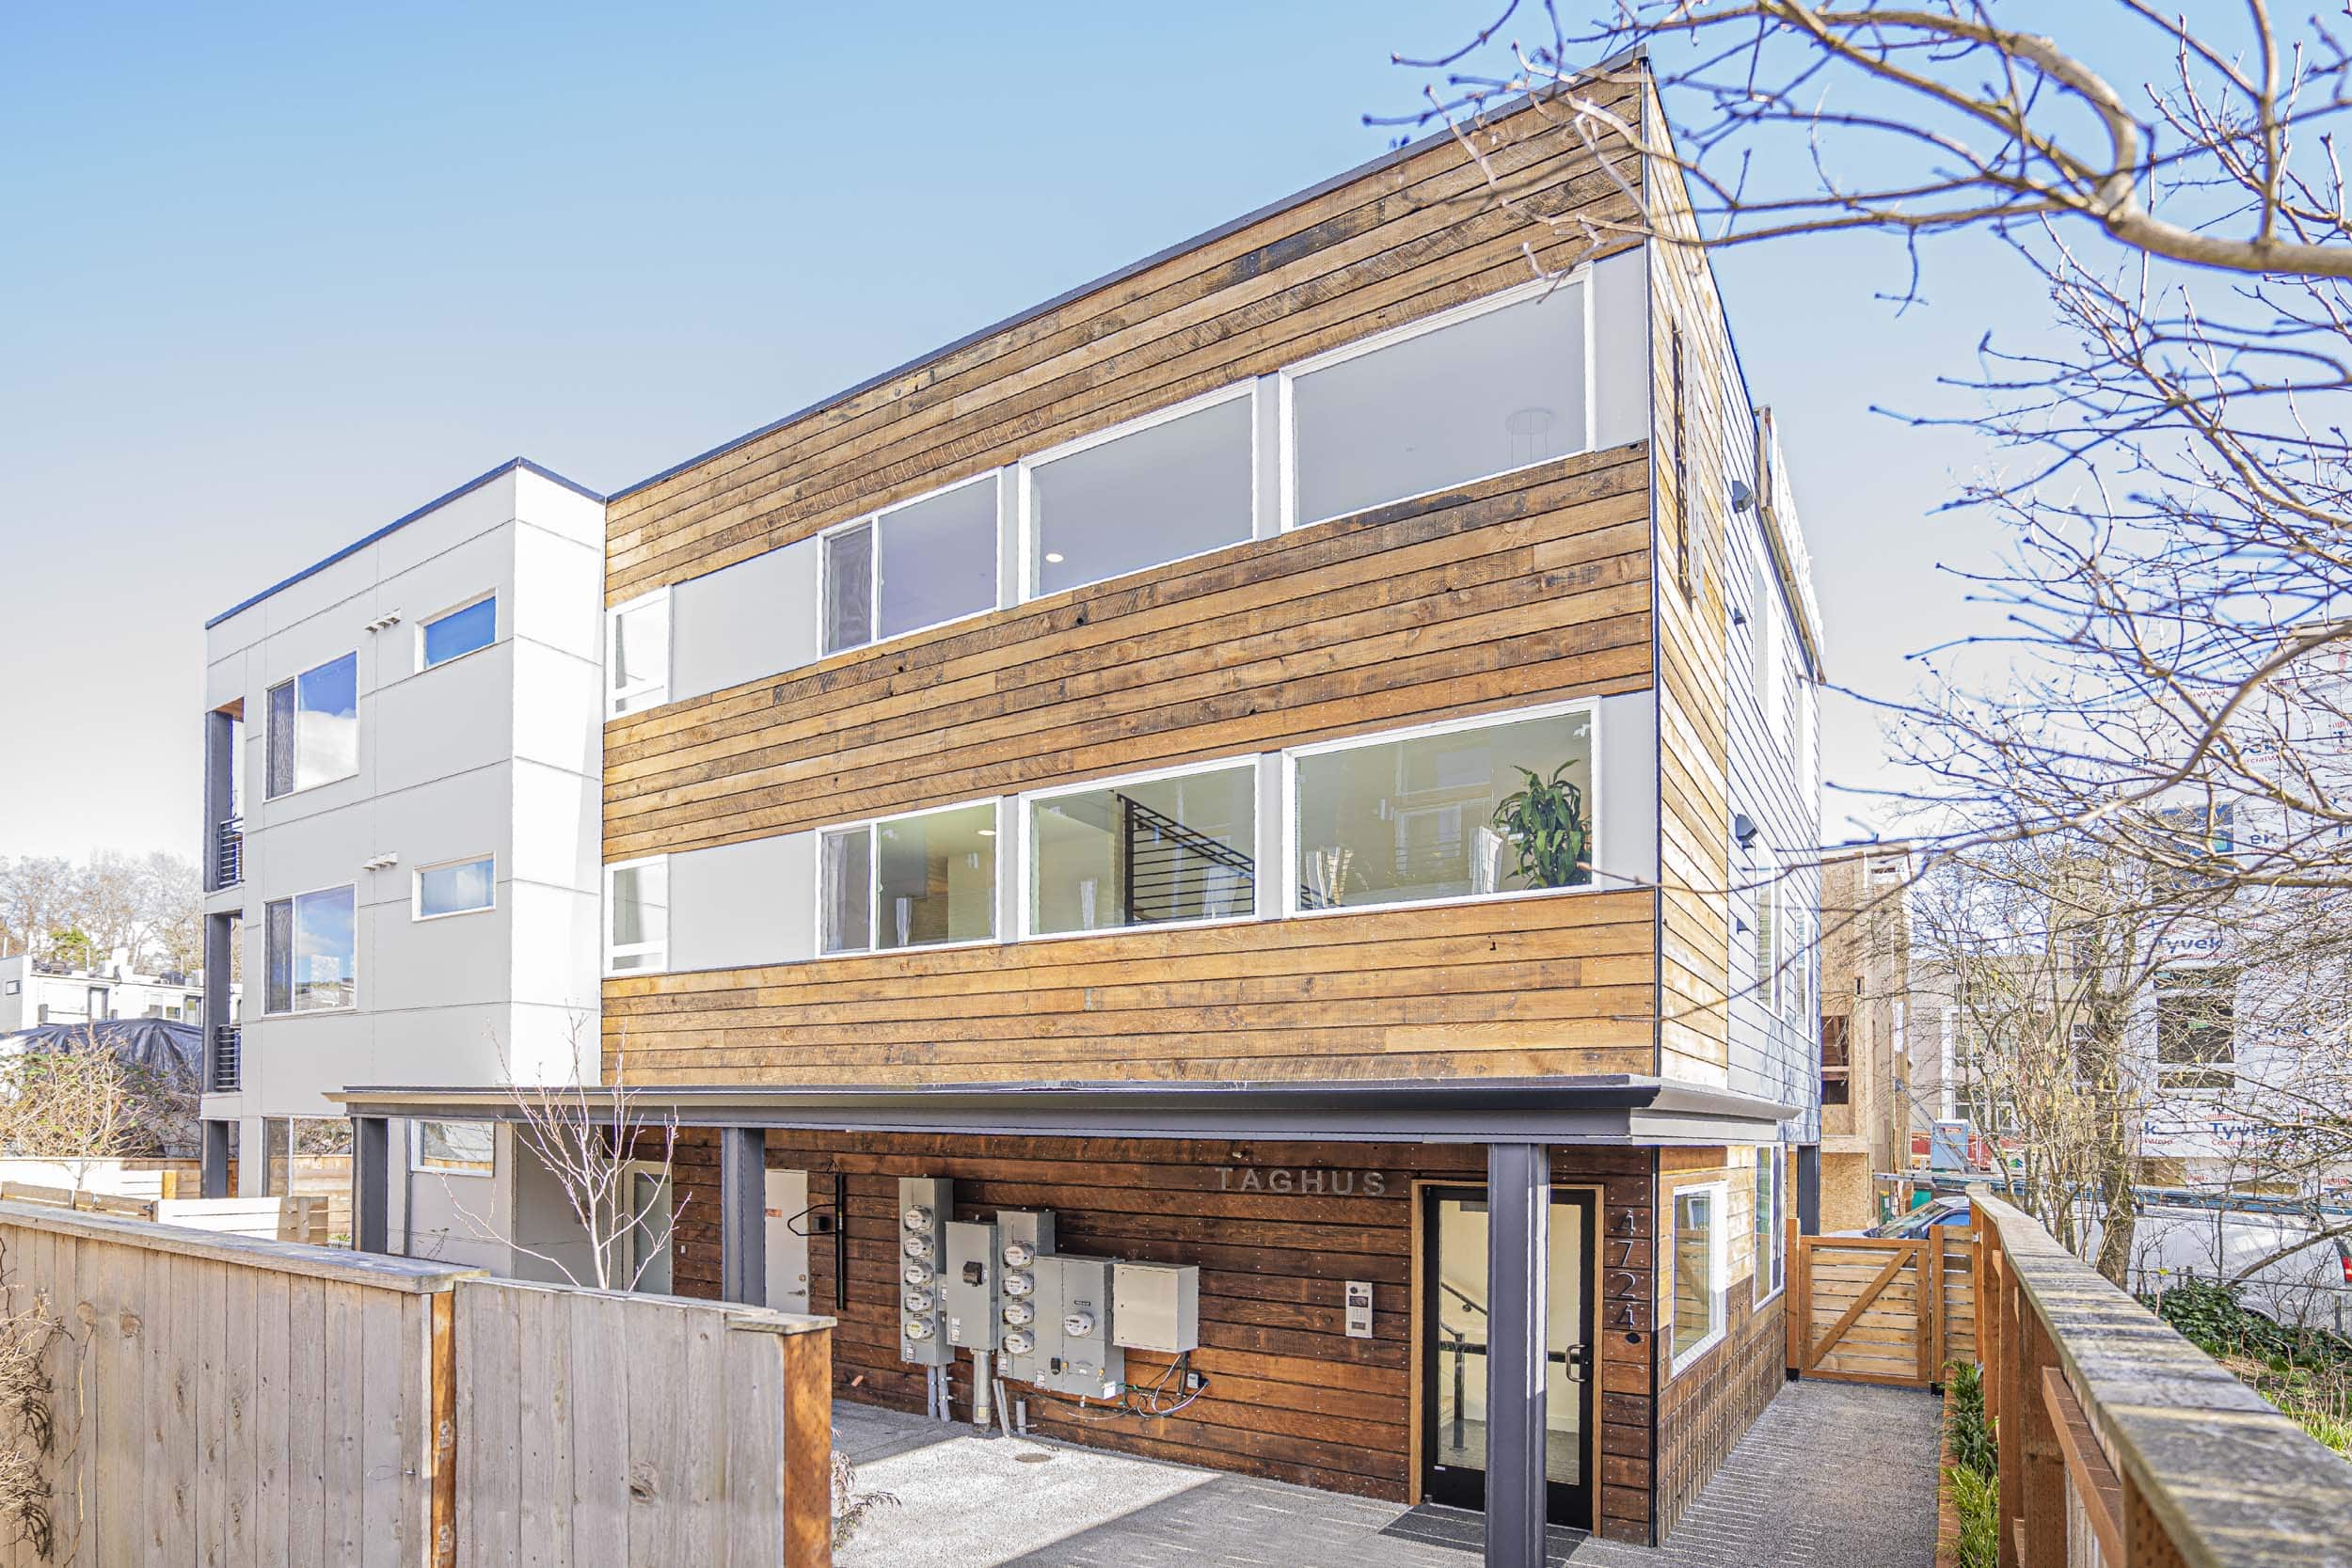 Custom design and construction of a nine unit apartment located at 4724 31st Ave S, Seattle, WA 98118